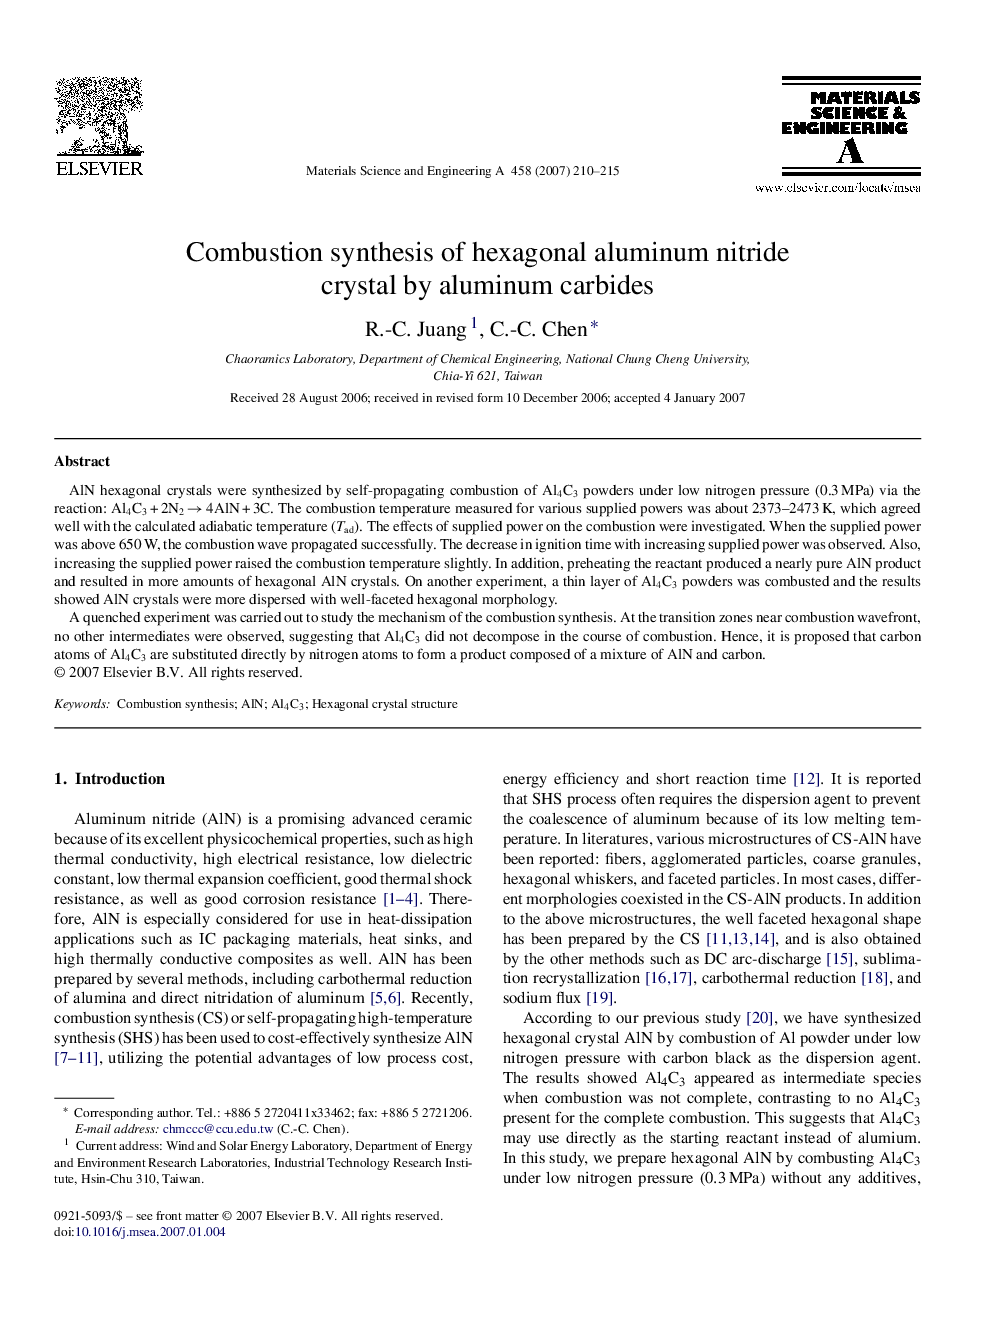 Combustion synthesis of hexagonal aluminum nitride crystal by aluminum carbides